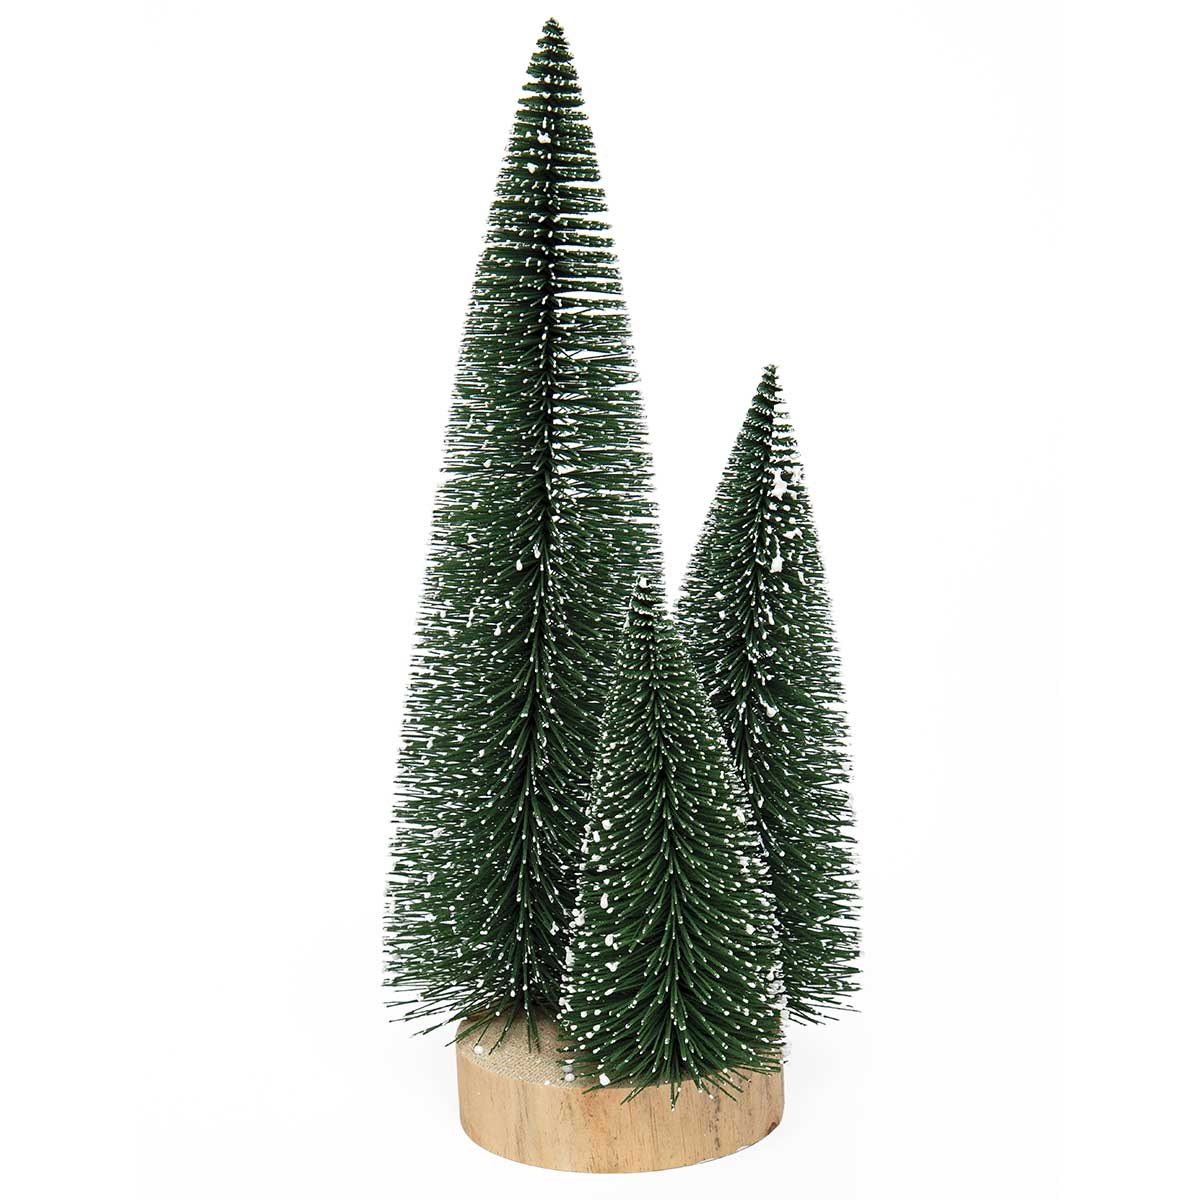 FOREST BRISTLE TREE X3 GREEN WITH SNOW AND WOOD BASE 5.5"X13"